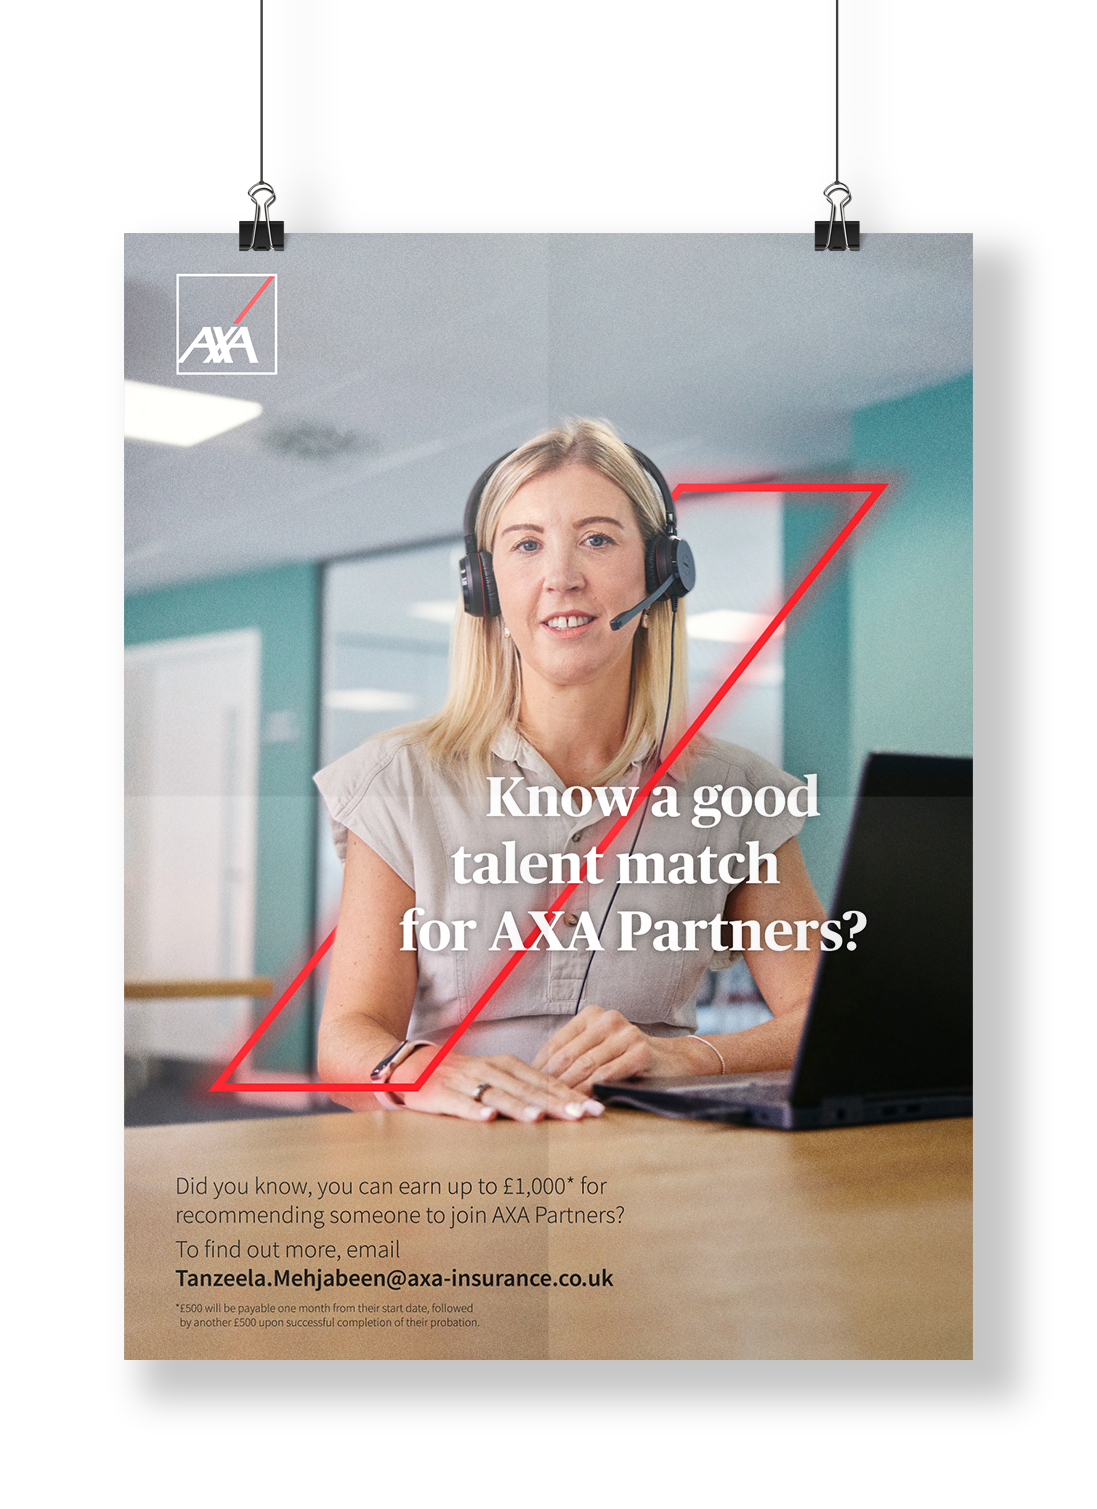 AXA raising the profile of customer service agents globally - poster mock up